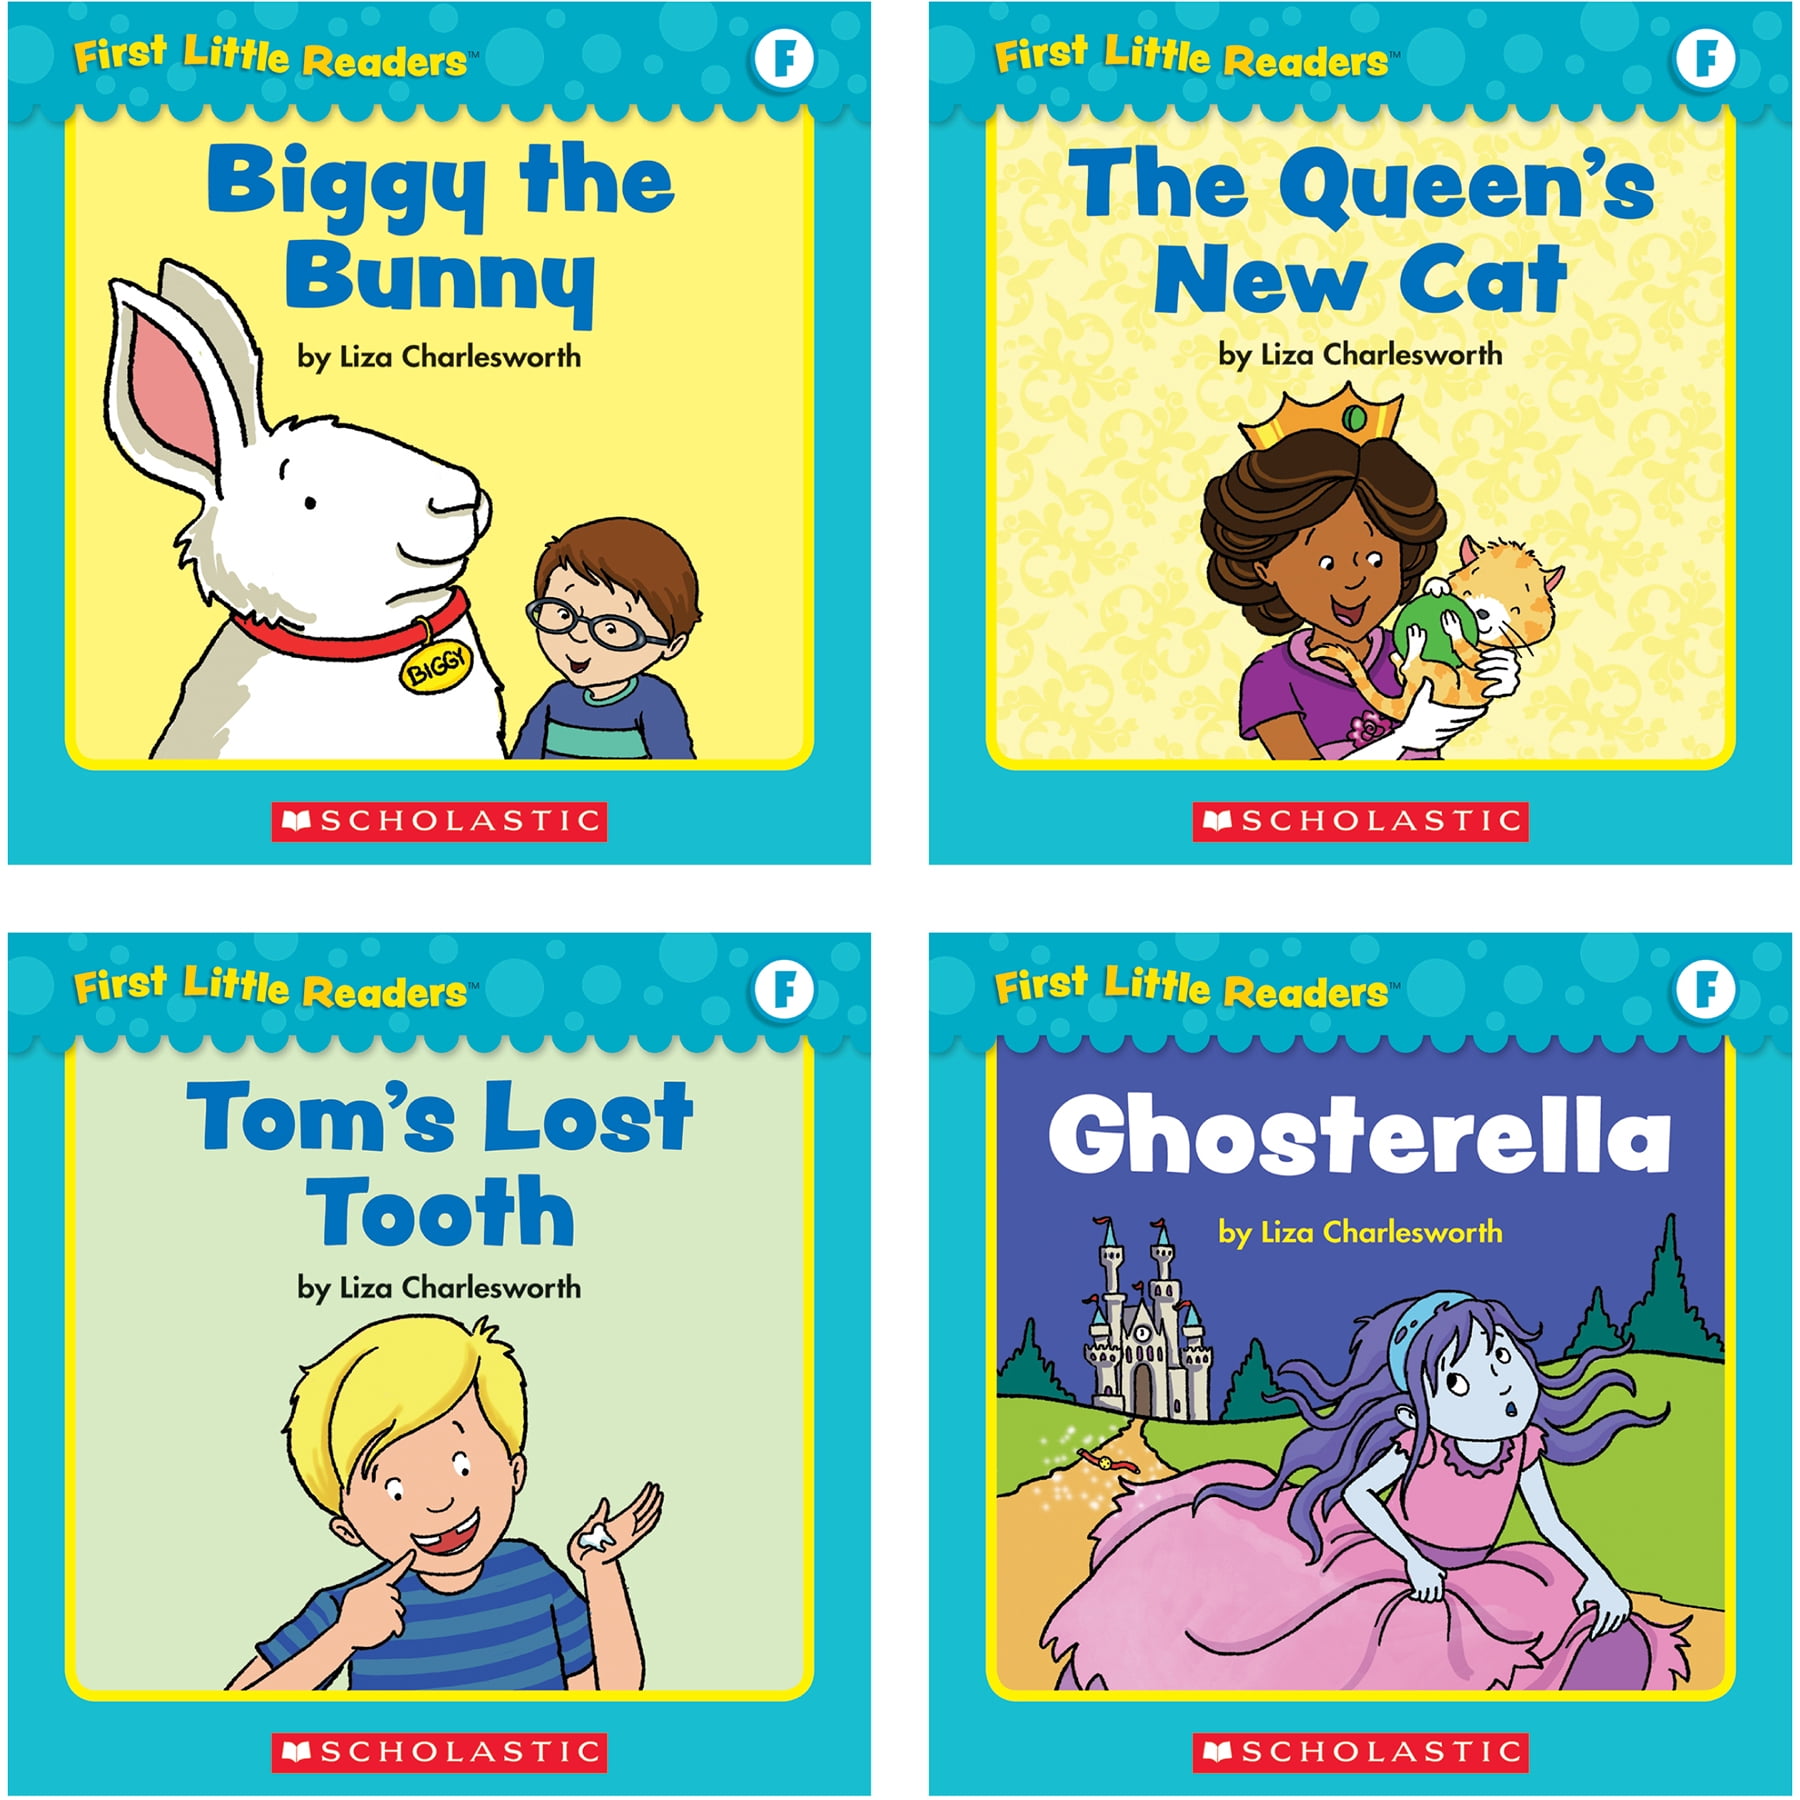 First Little Readers: First Little Readers: Guided Reading Levels E & F  (Parent Pack): 16 Irresistible Books That Are Just the Right Level for  Growing 